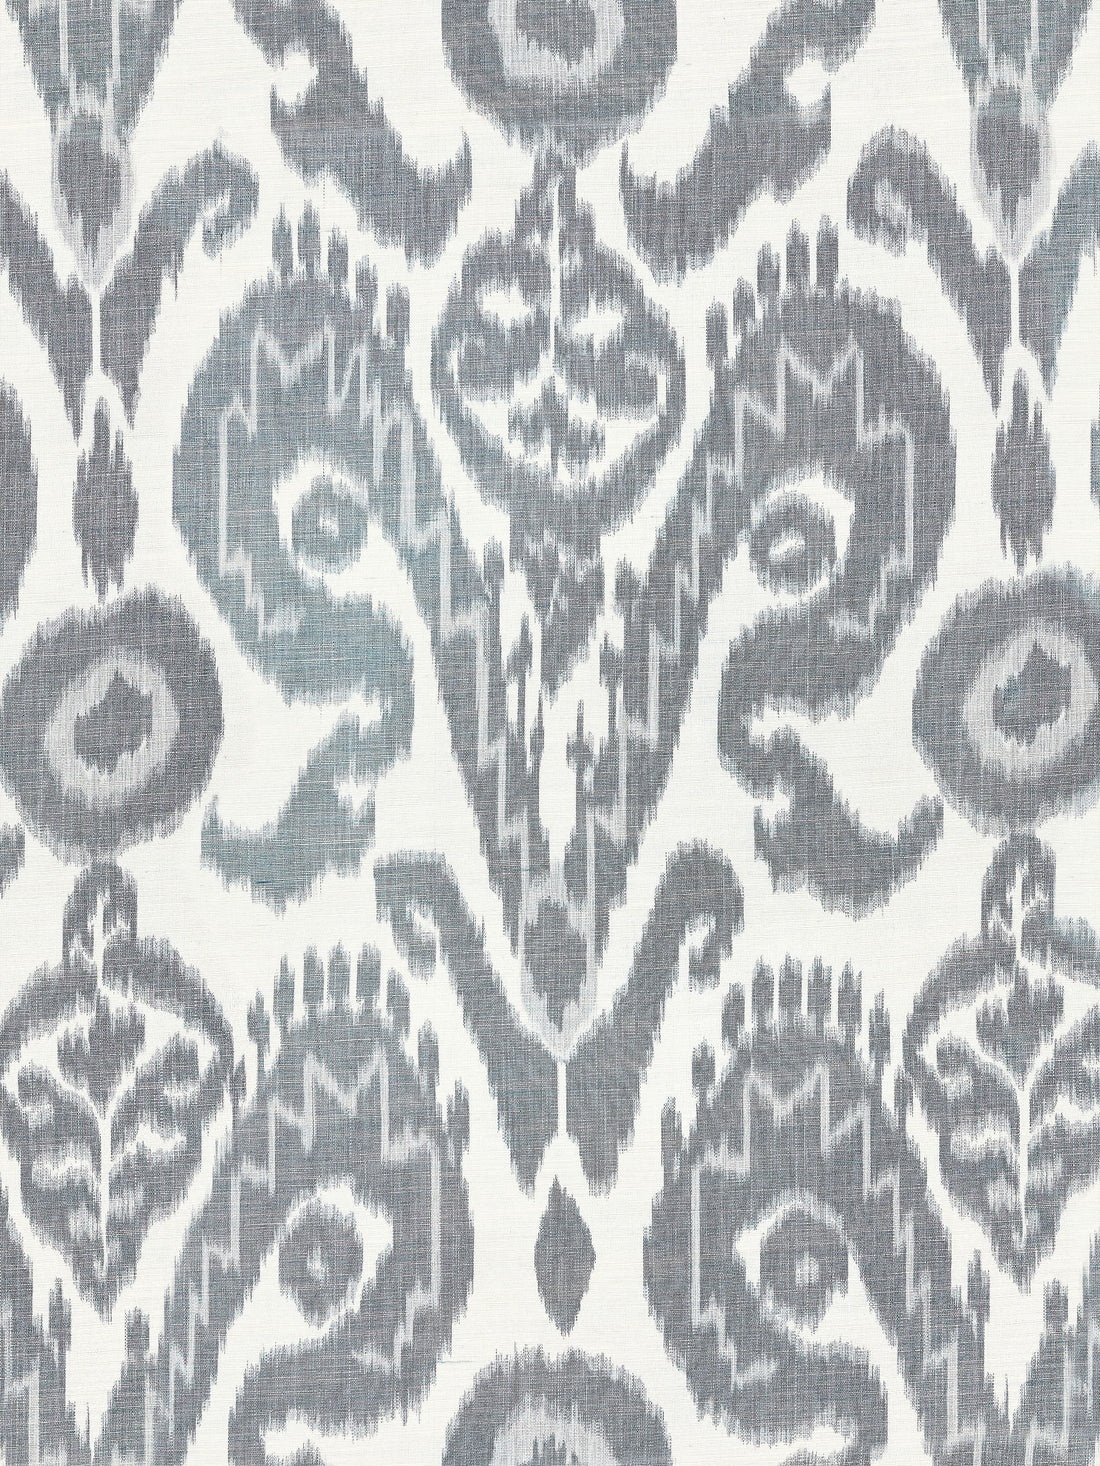 Bukhara Silk Ikat fabric in indigo color - pattern number SC 000127097 - by Scalamandre in the Scalamandre Fabrics Book 1 collection